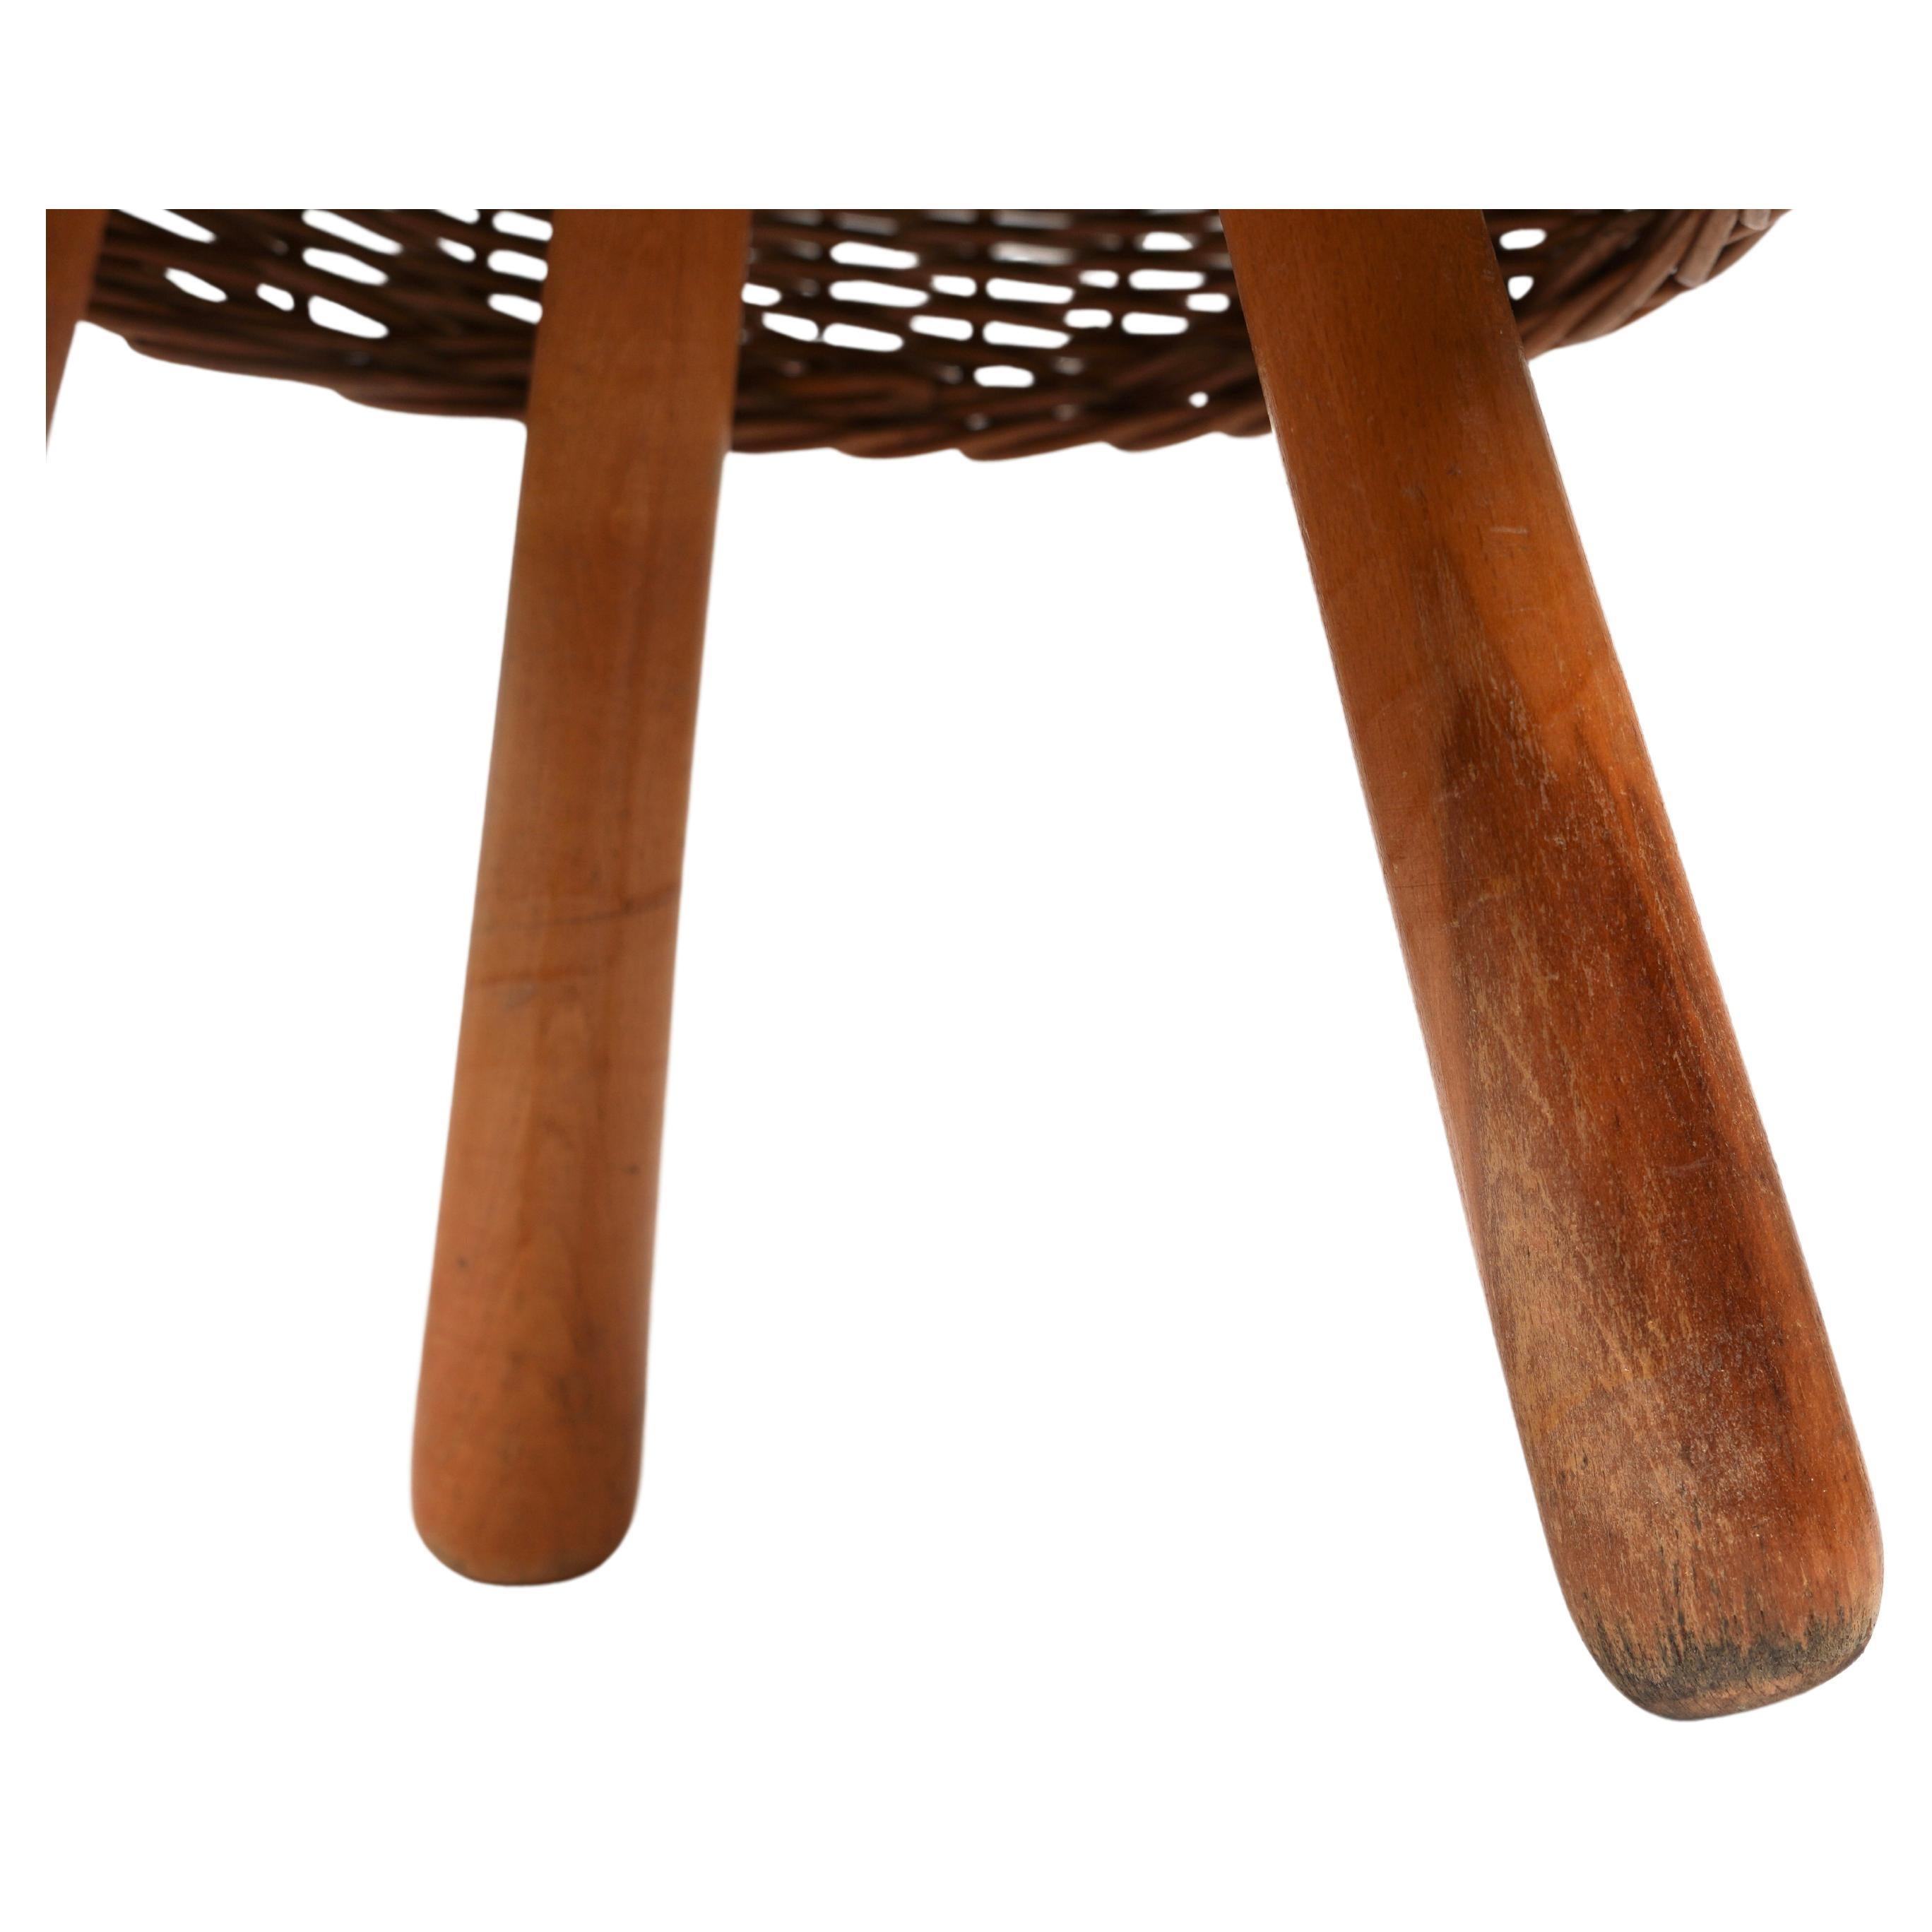 Midcentury Wicker and Wood Tripod Stool by Tony Paul, United States, 1950s For Sale 5